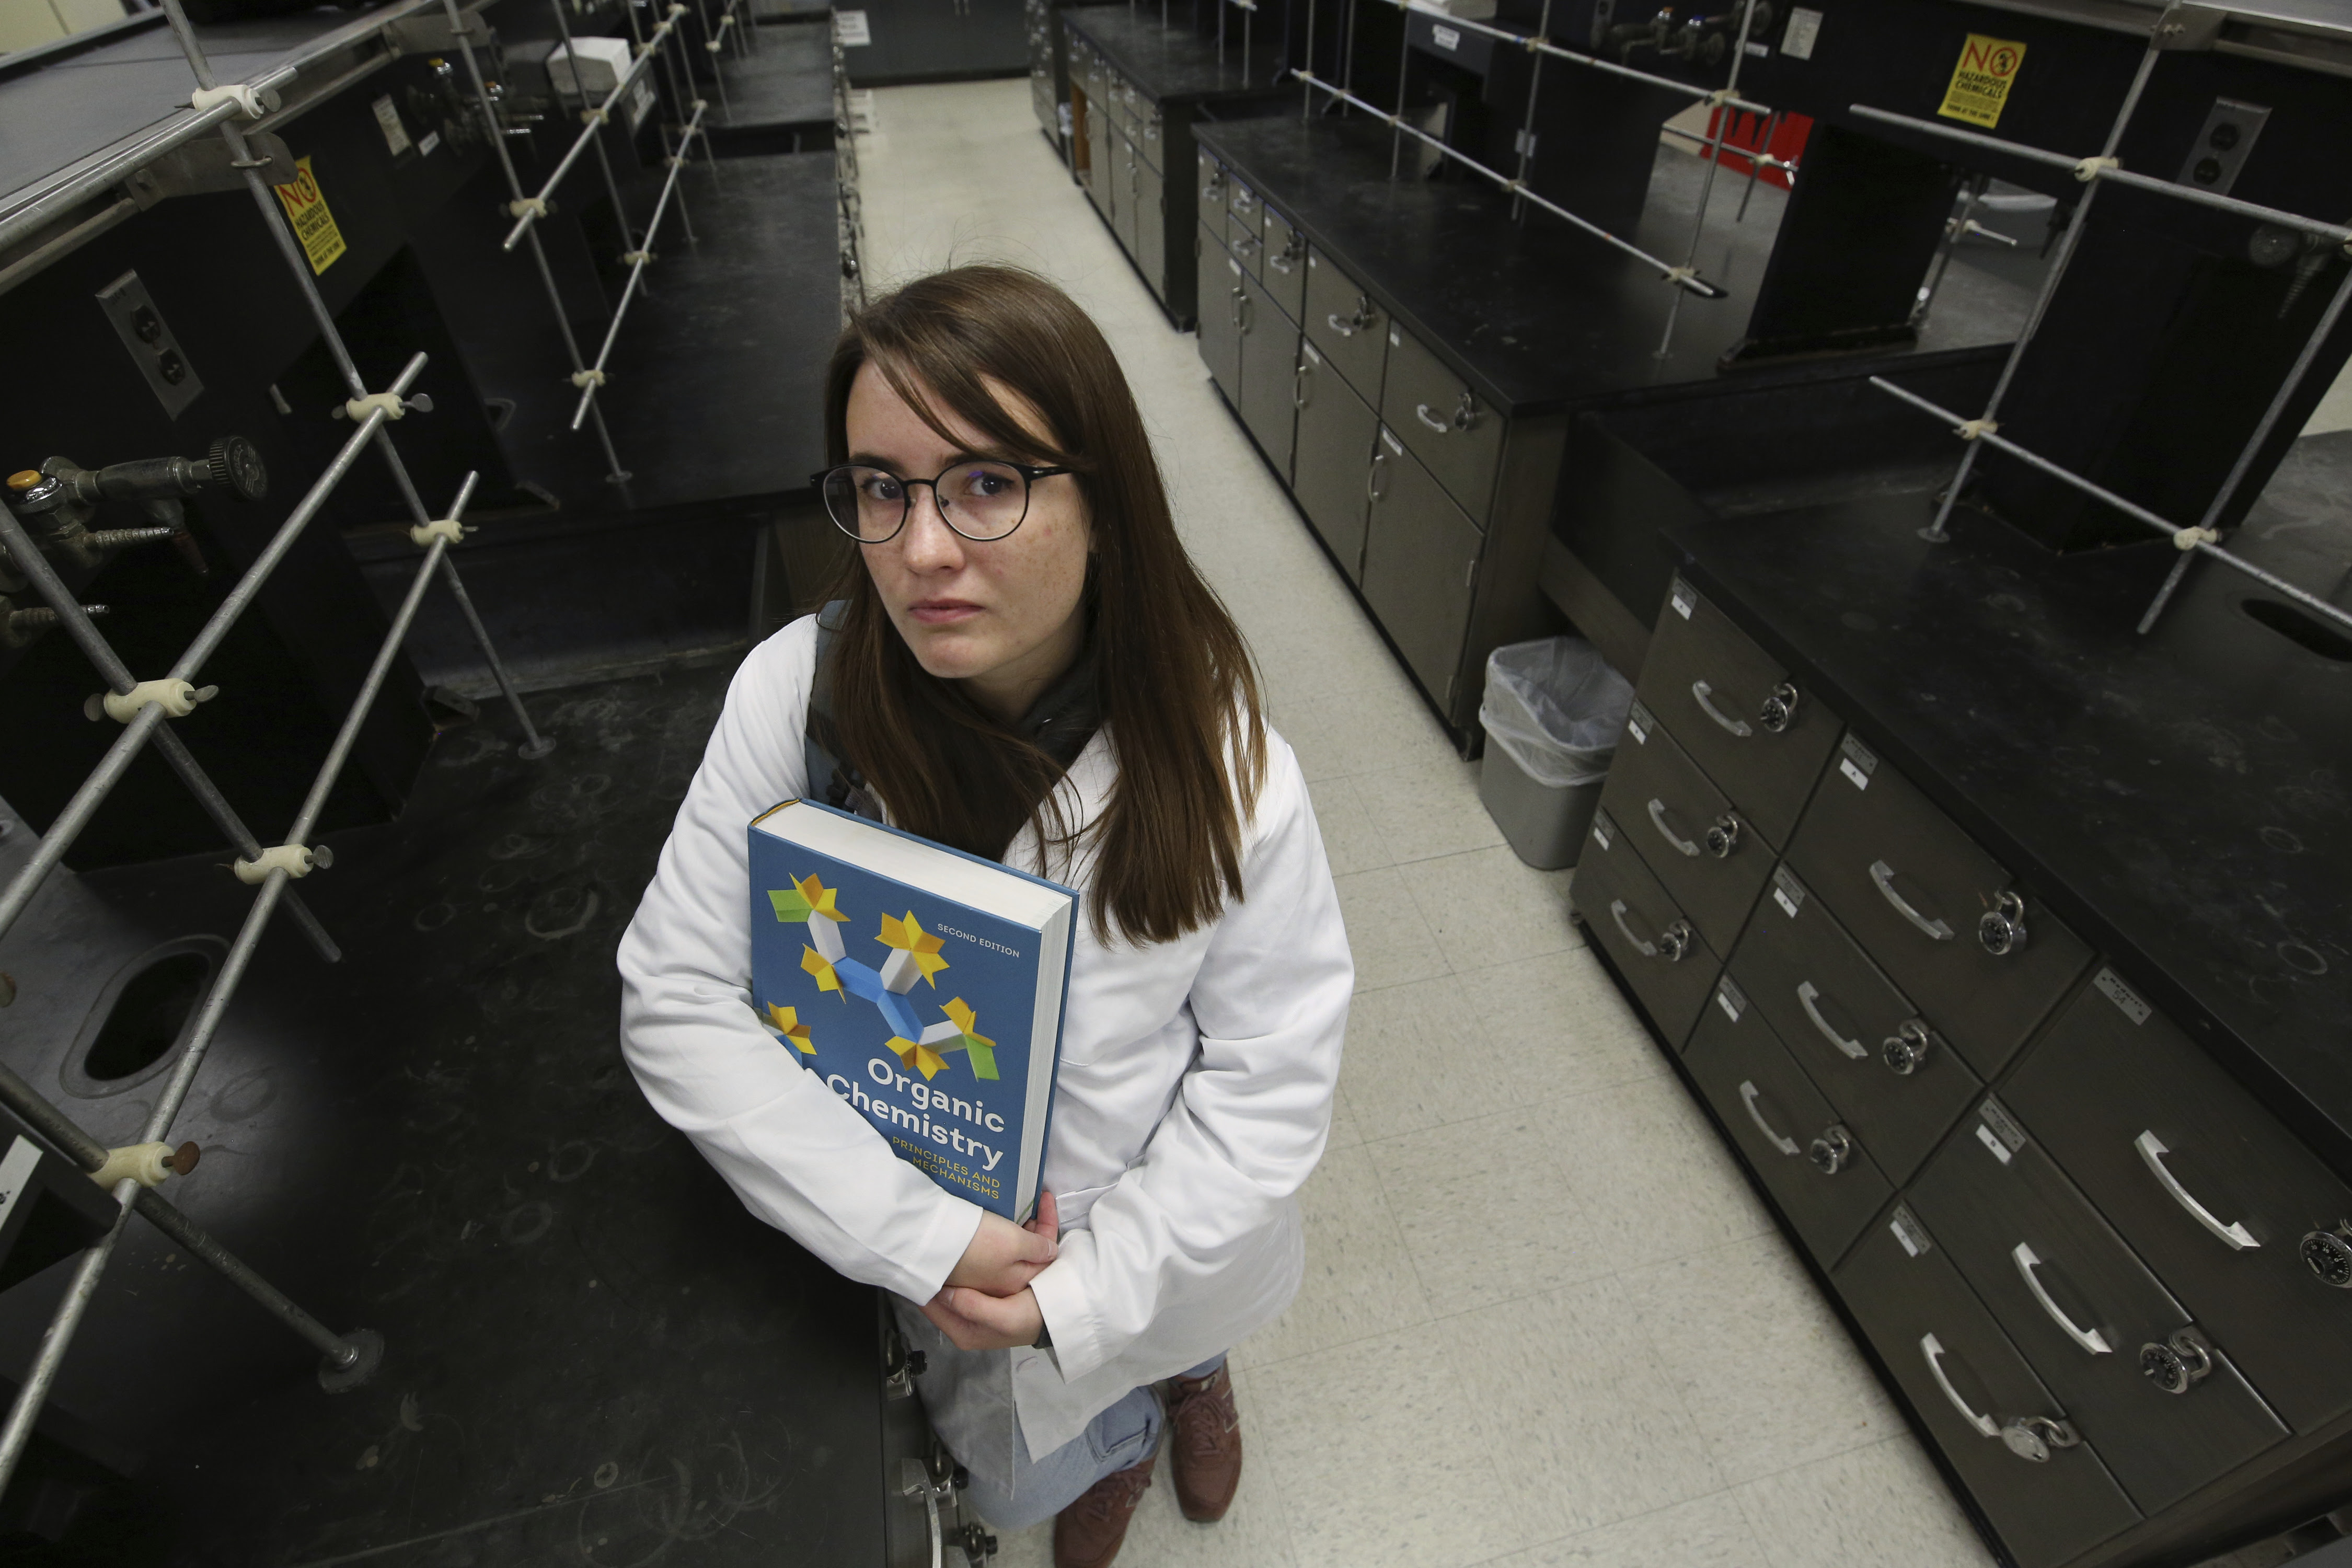 Ricki Korba, 23, stands for a portrait in her lab at California State University, Bakersfield in Bakersfield, Calif., on Friday, April 14, 2023.